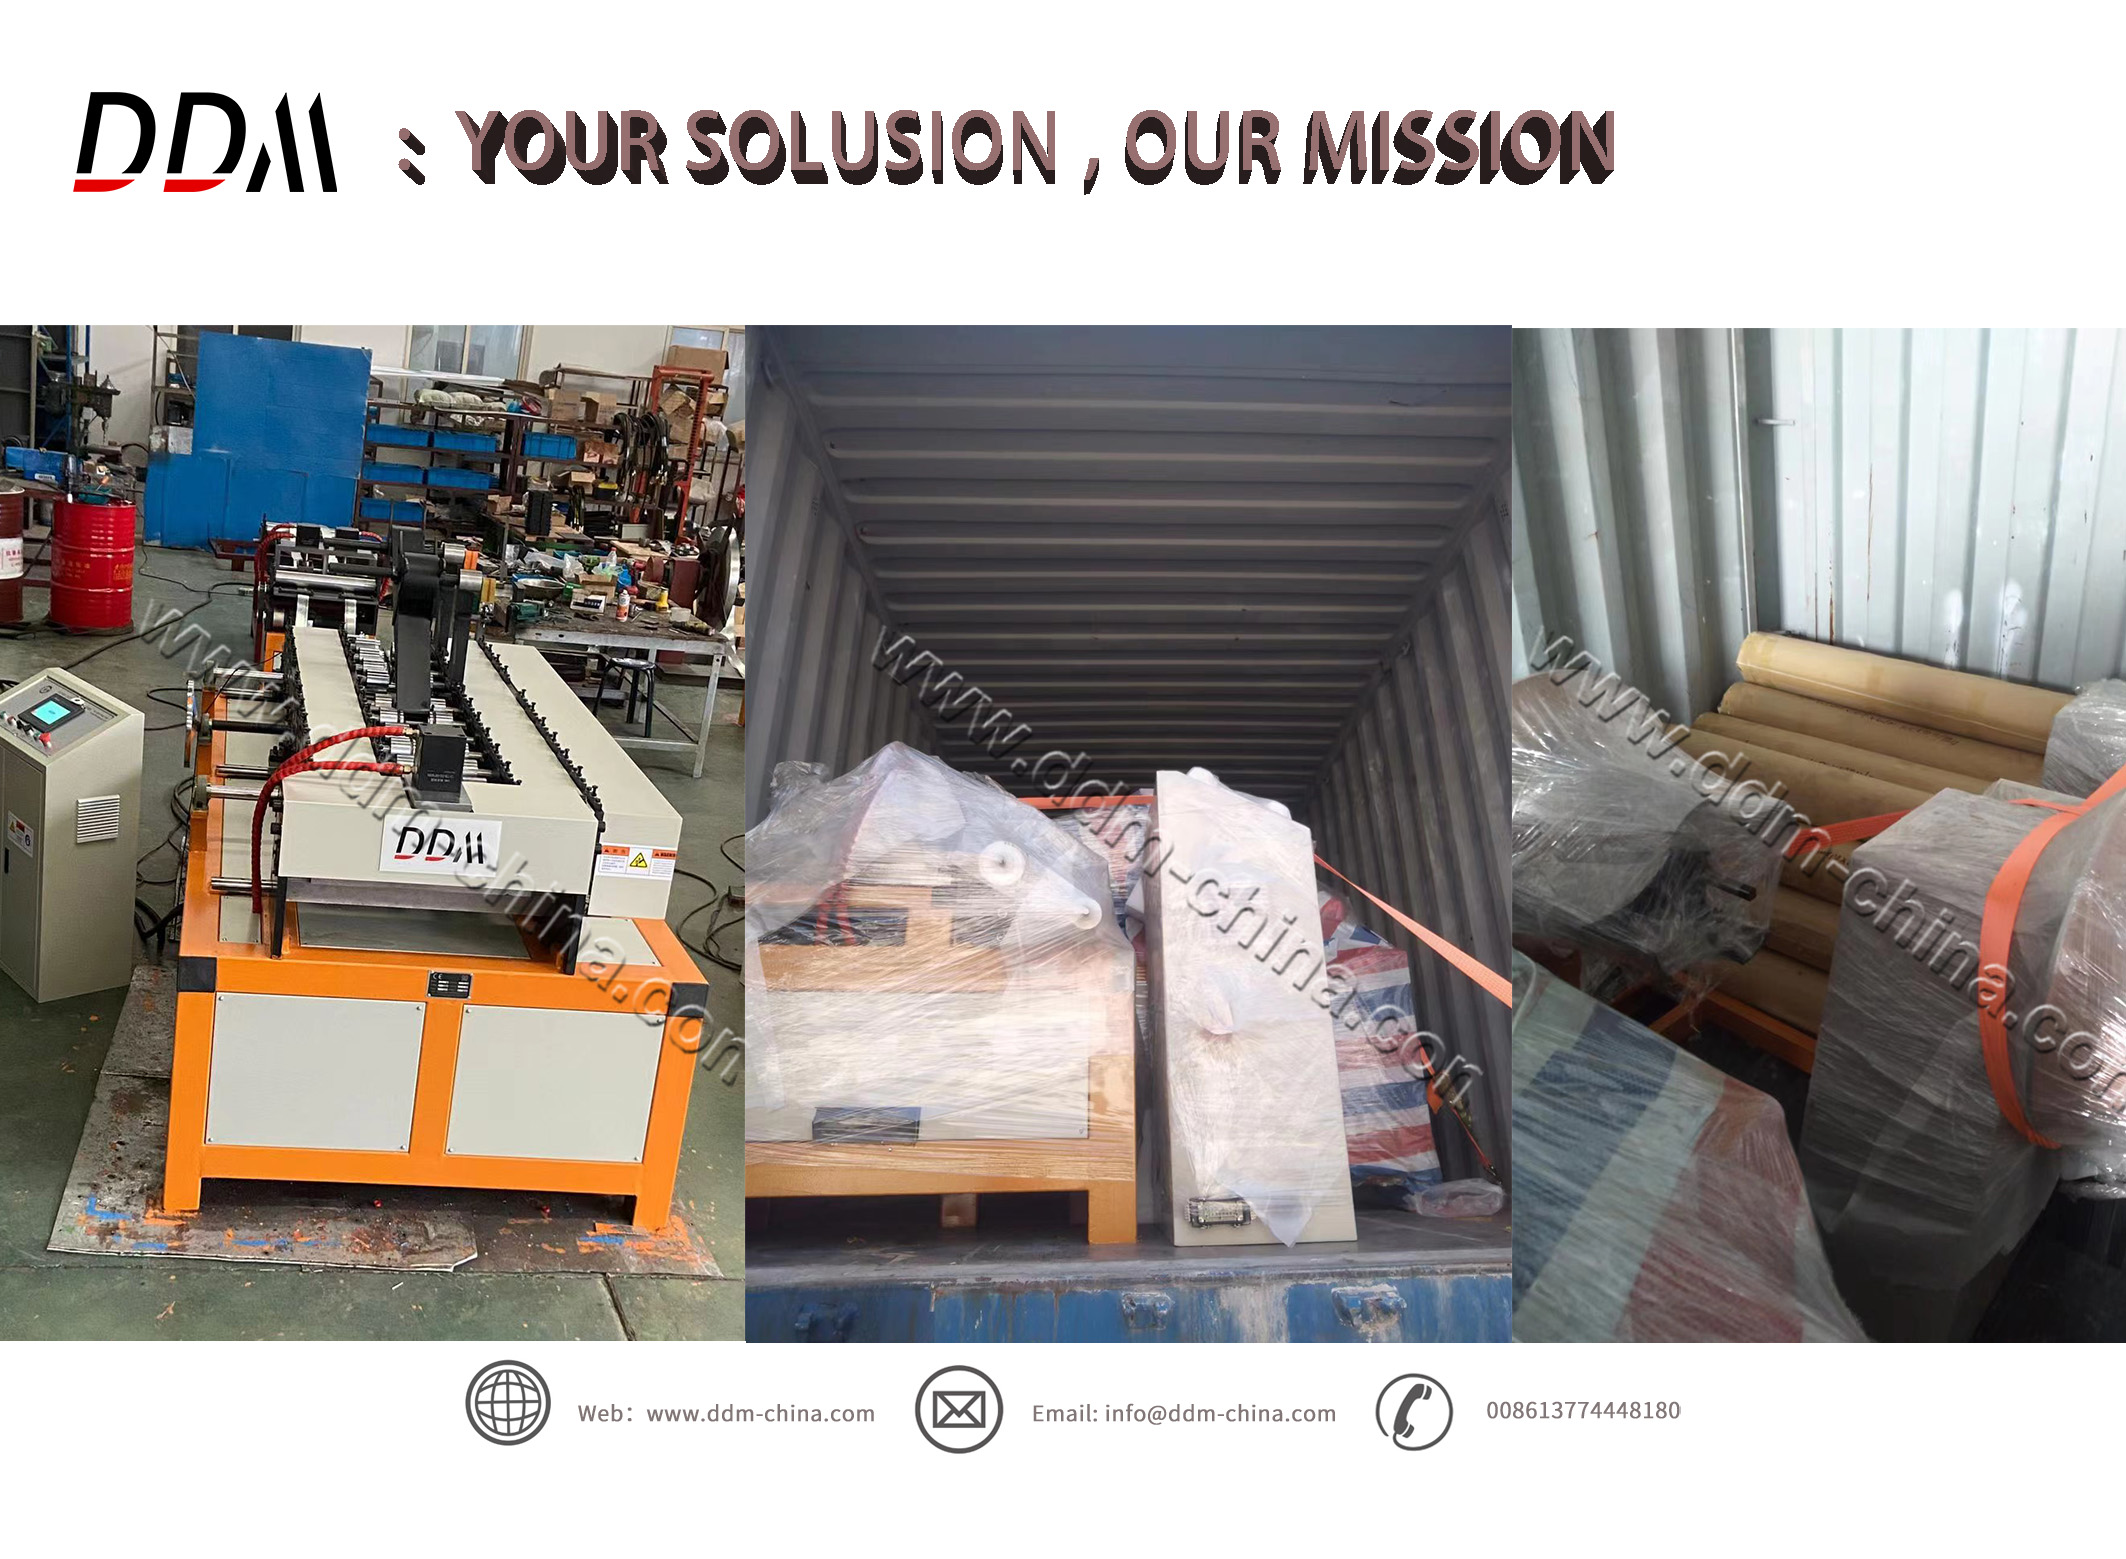 Container loading image for DDM FLEX DUCT CONNECTOR MACHINE TO INDIA 